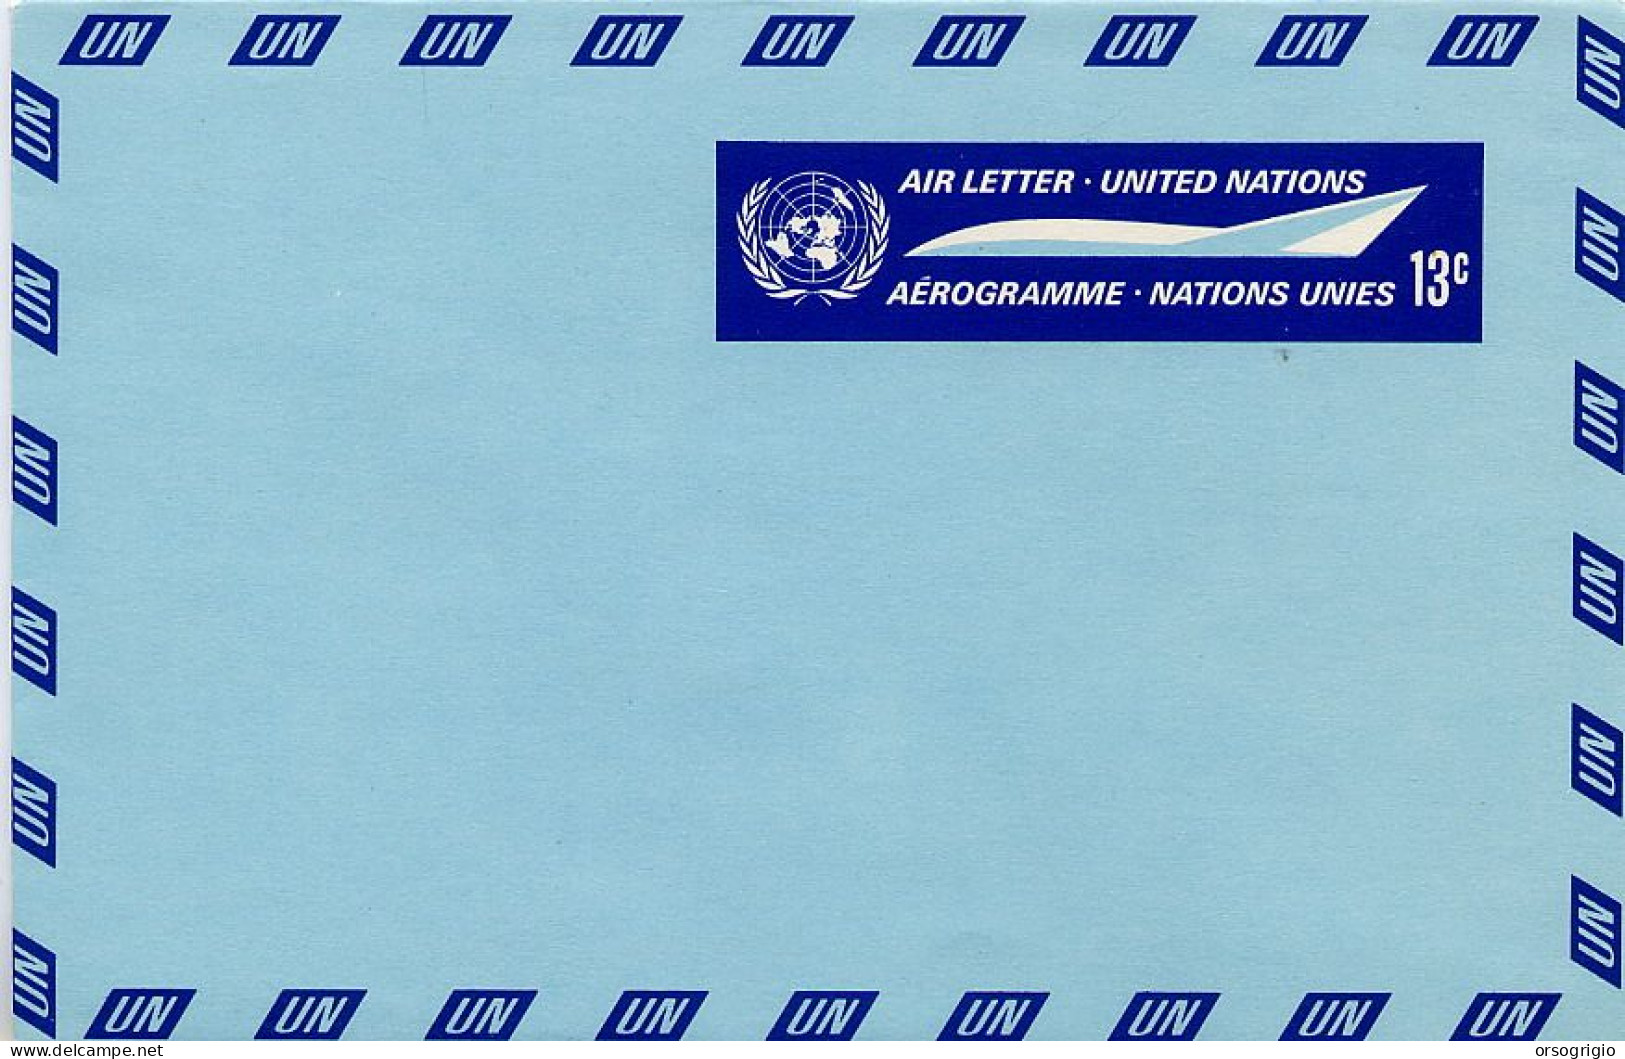 ONU - UNITED NATIONS - NATIONS UNIES -  N° 6 Covers - Collezioni & Lotti